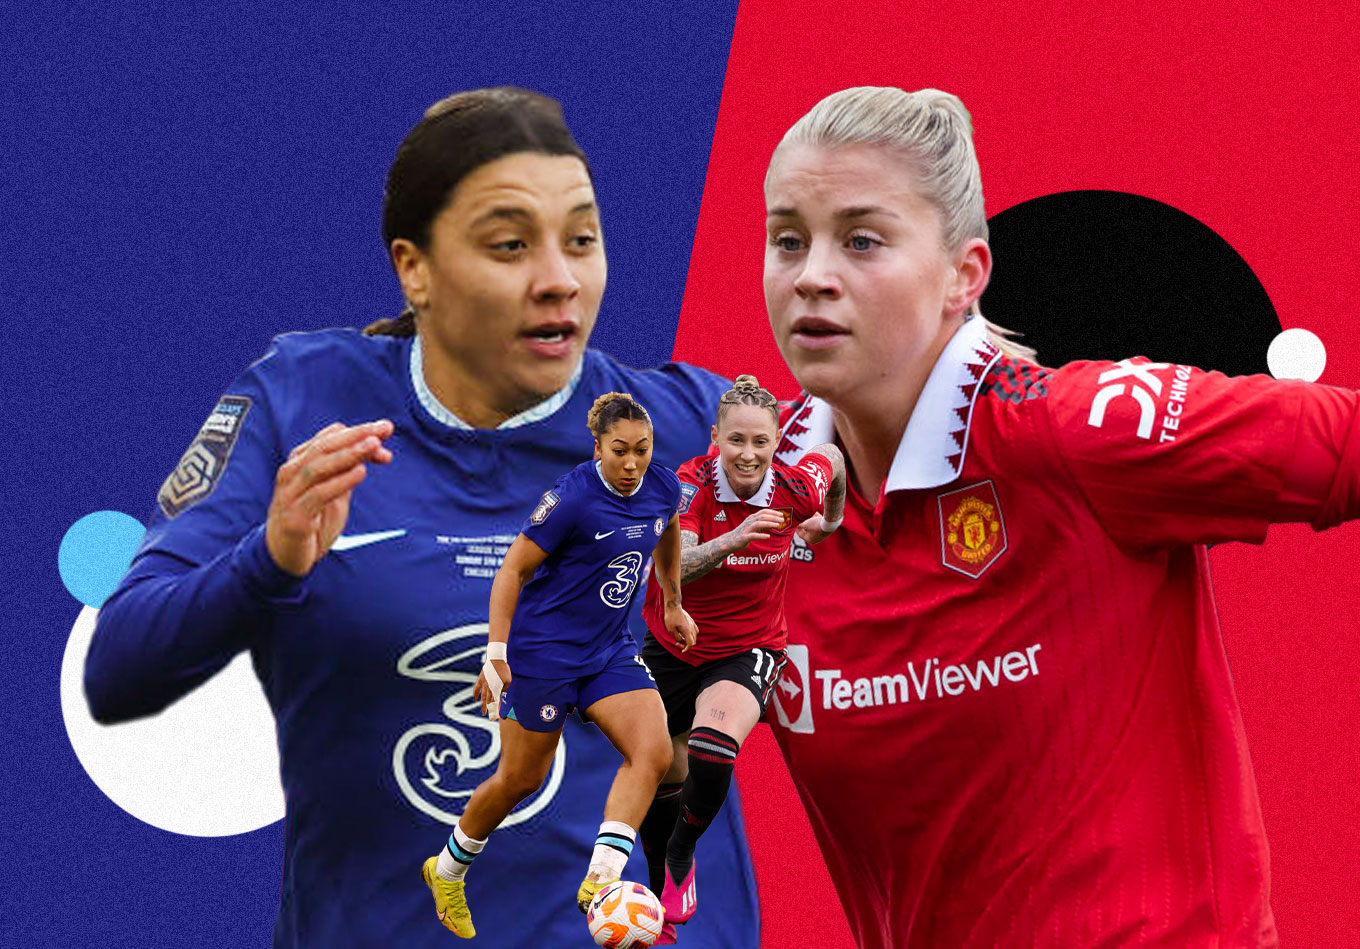 Battle at Kingsmeadow: Which of Chelsea or Man Utd Will Take a Step Closer to the WSL Crown?